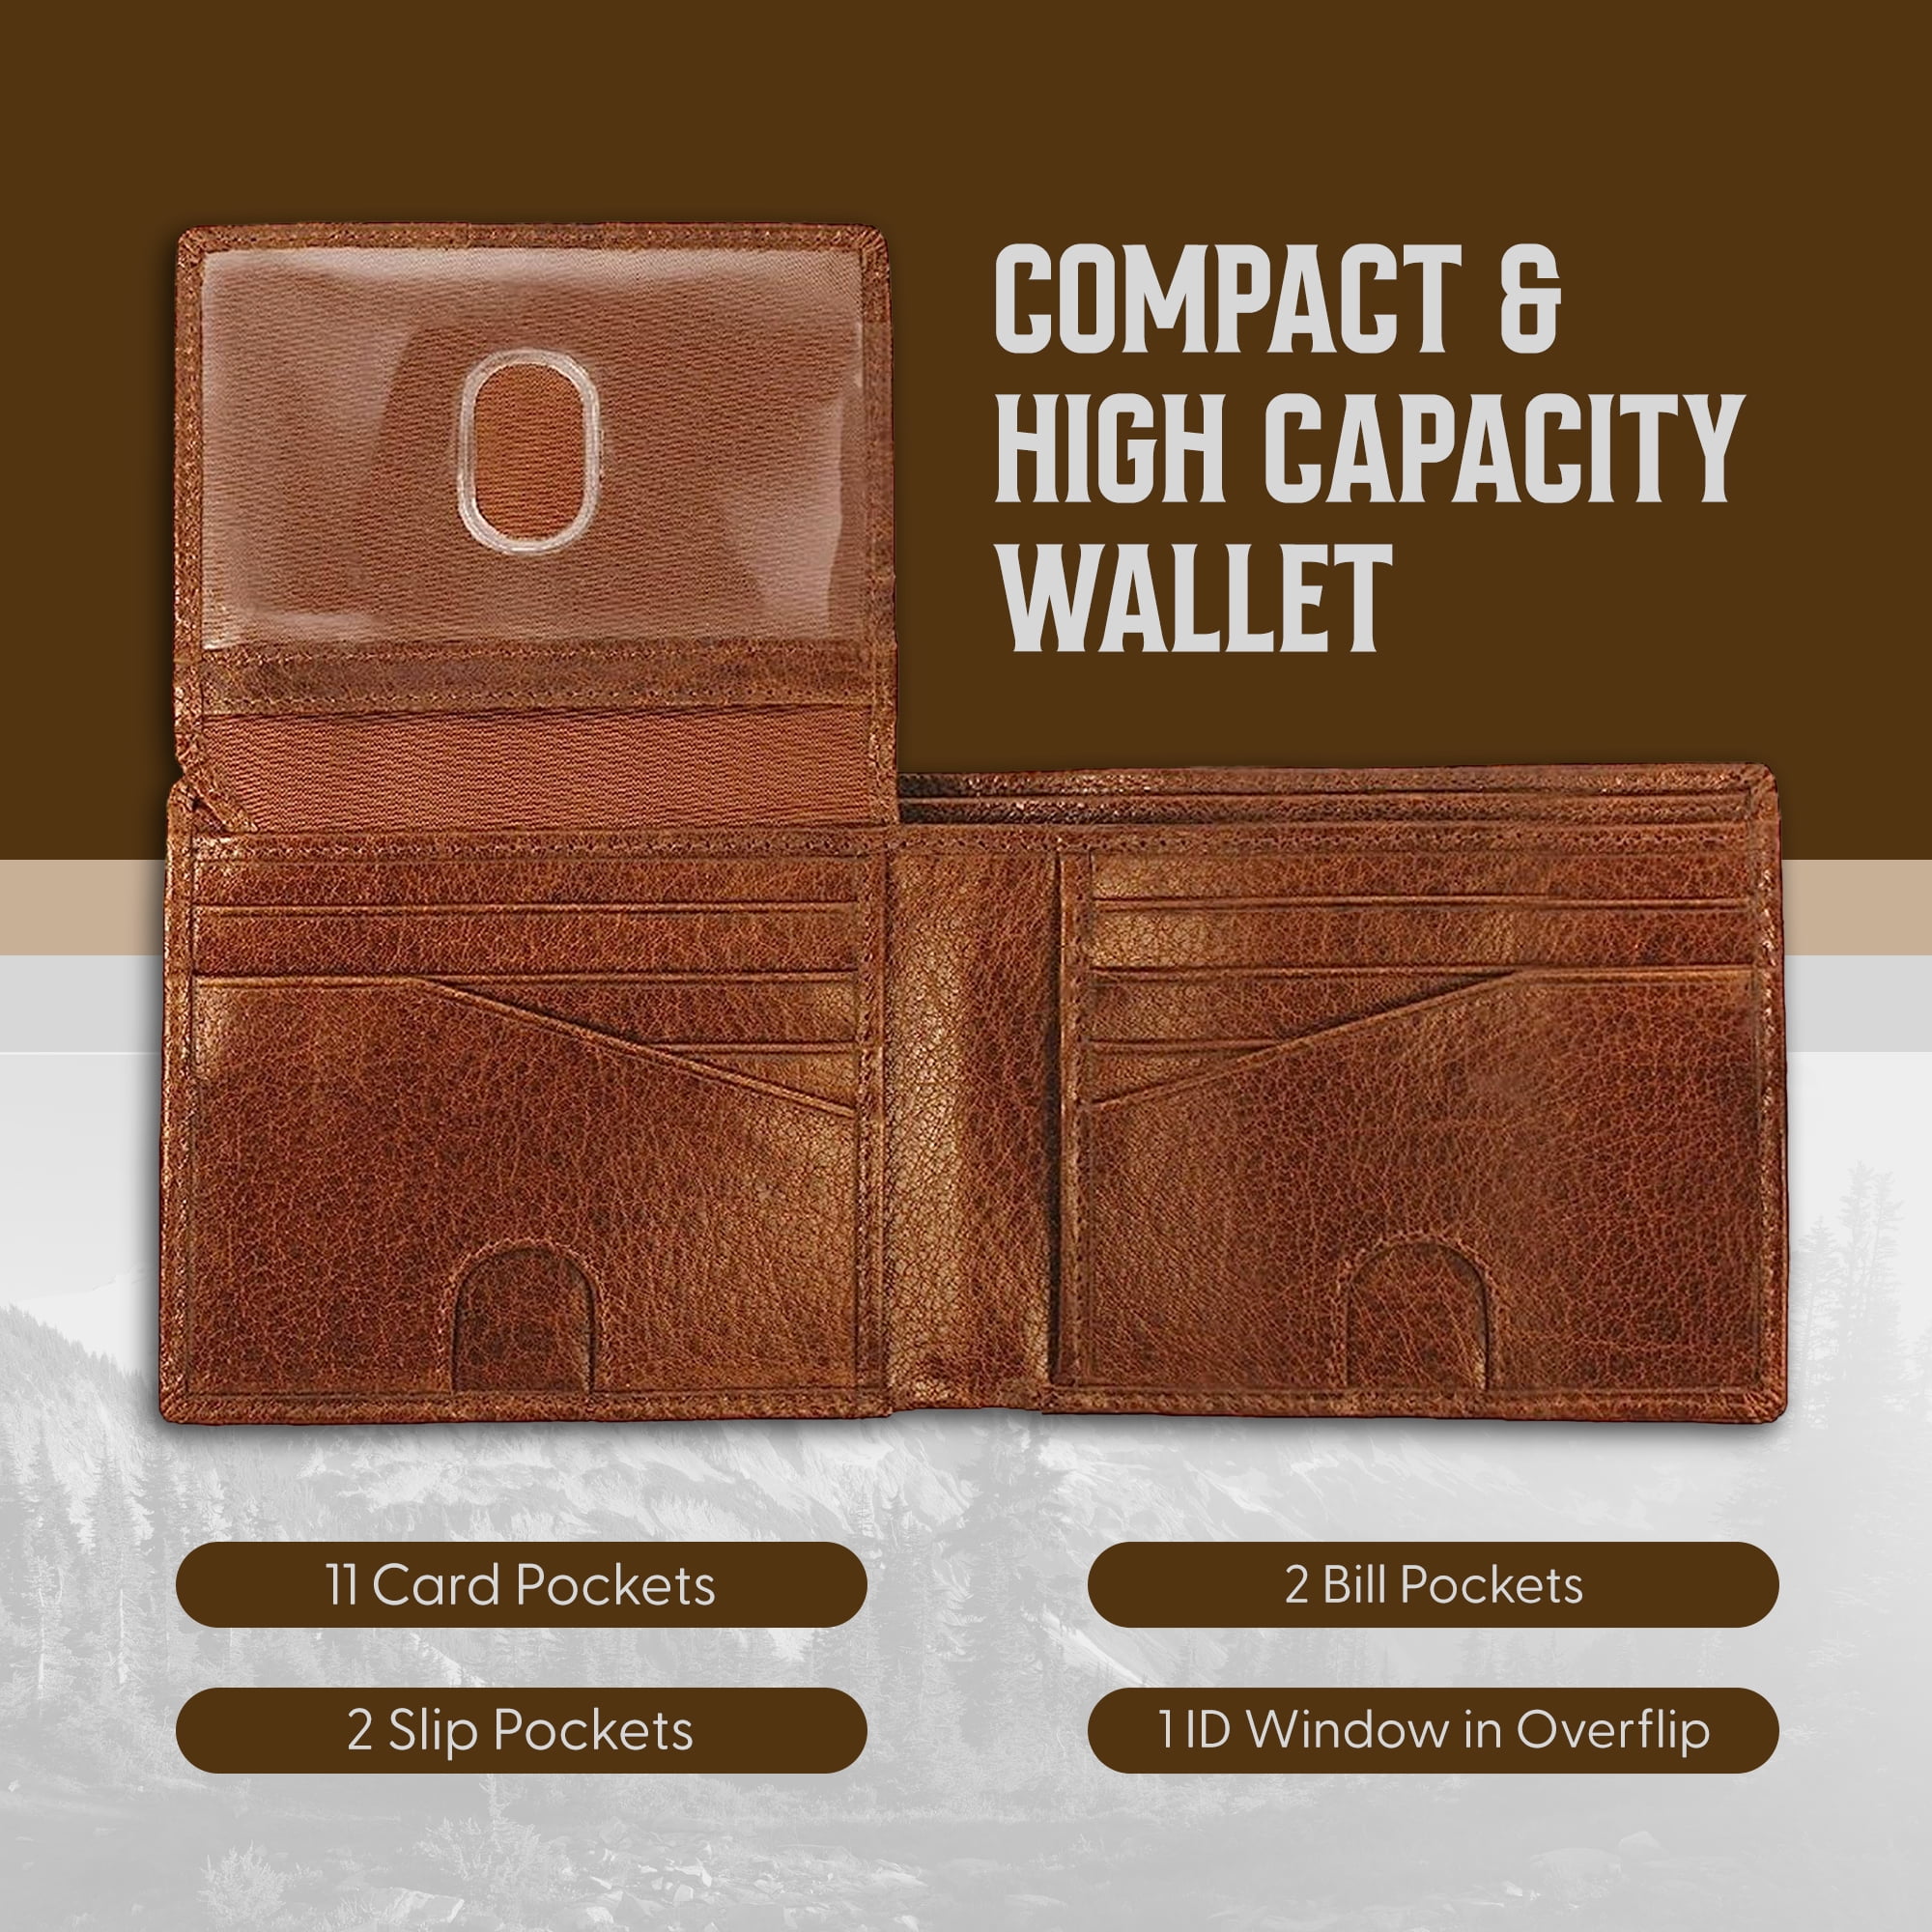 Bull Guard Best Leather Men's RFID Trifold Wallet with ID Great Outdoor Wallet